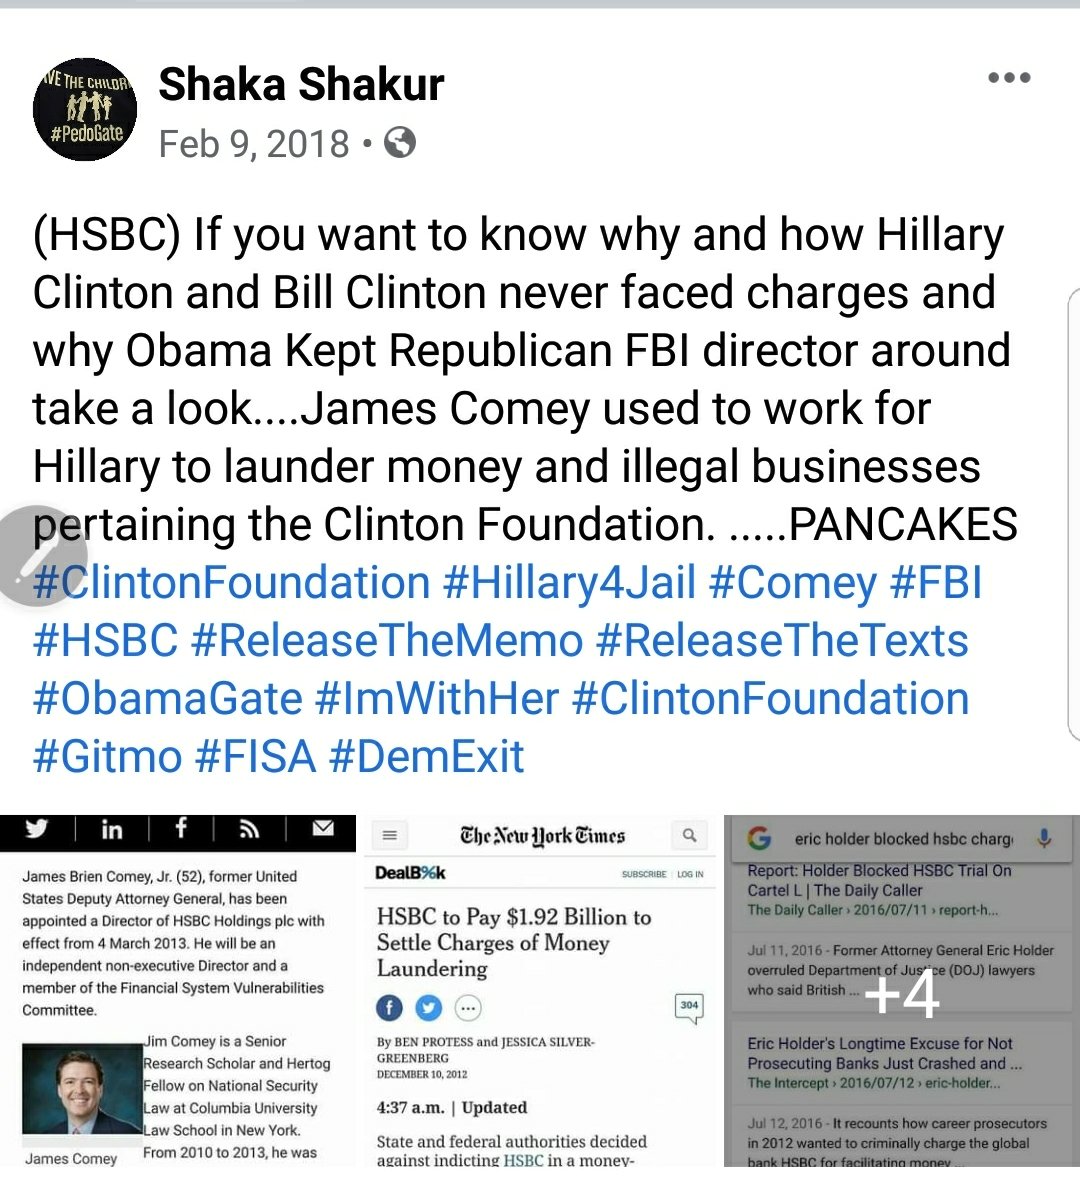 2018*post*(HSBC) If you want to know why and how Hillary Clinton and Bill Clinton never faced charges and why Obama Kept Republican FBI director around take a look...James Comey used to work for Hillary to launder money and illegal businesses pertaining the Clinton Foundation..